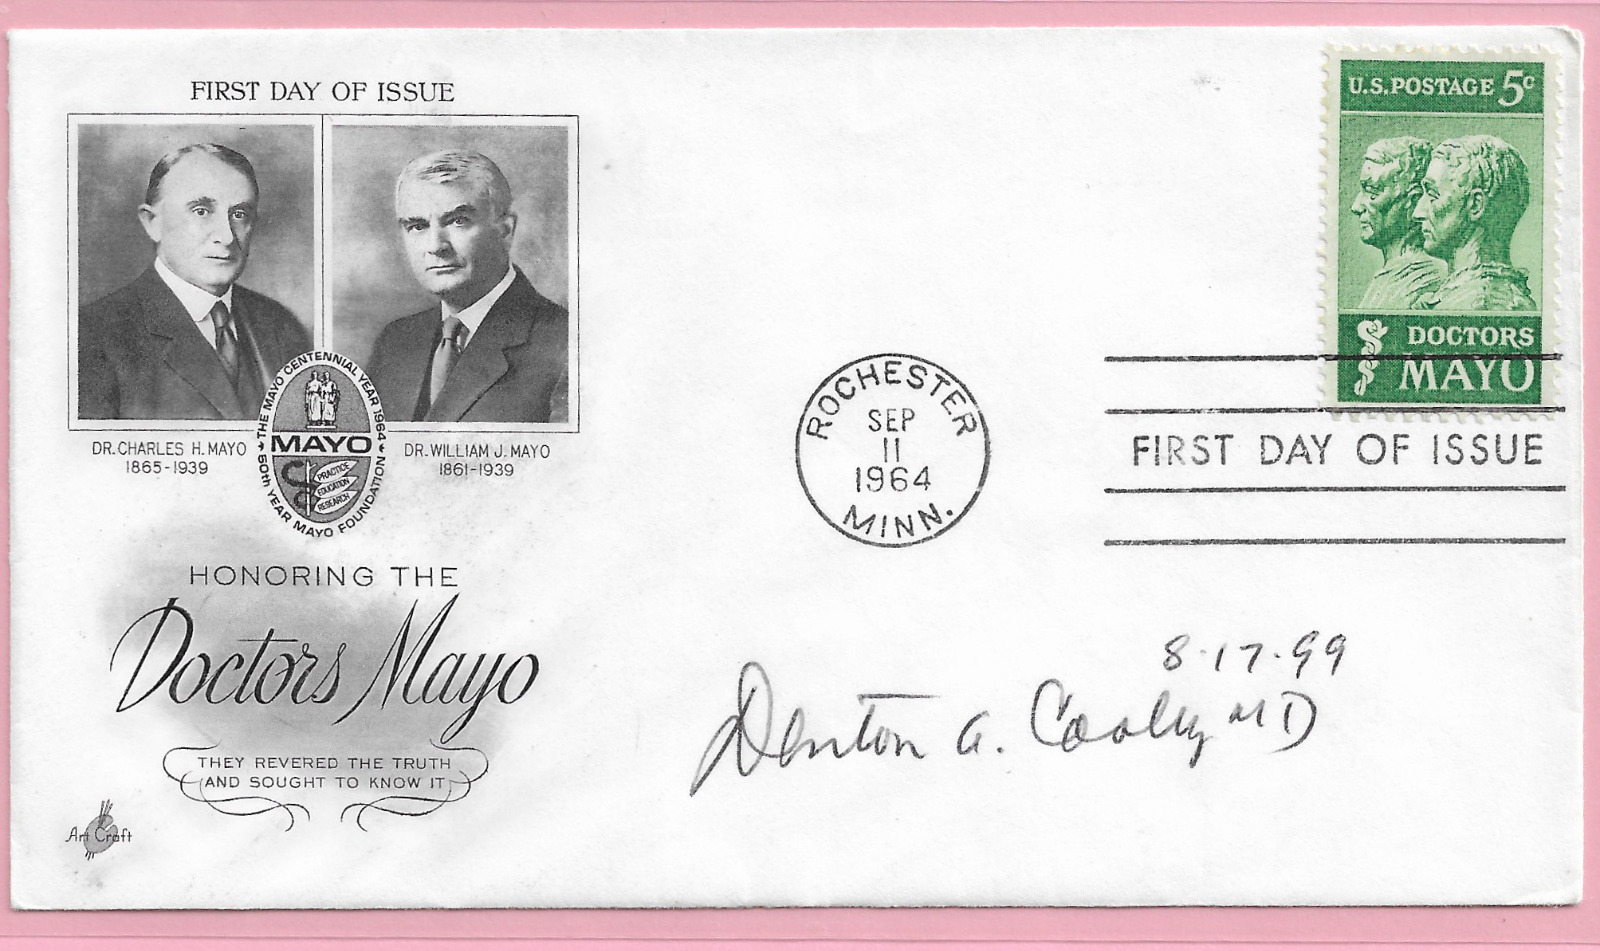 Dr Denton Cooley Heart Surgeon Inventor Signed Autograph Mayo Brothers FDC \'64